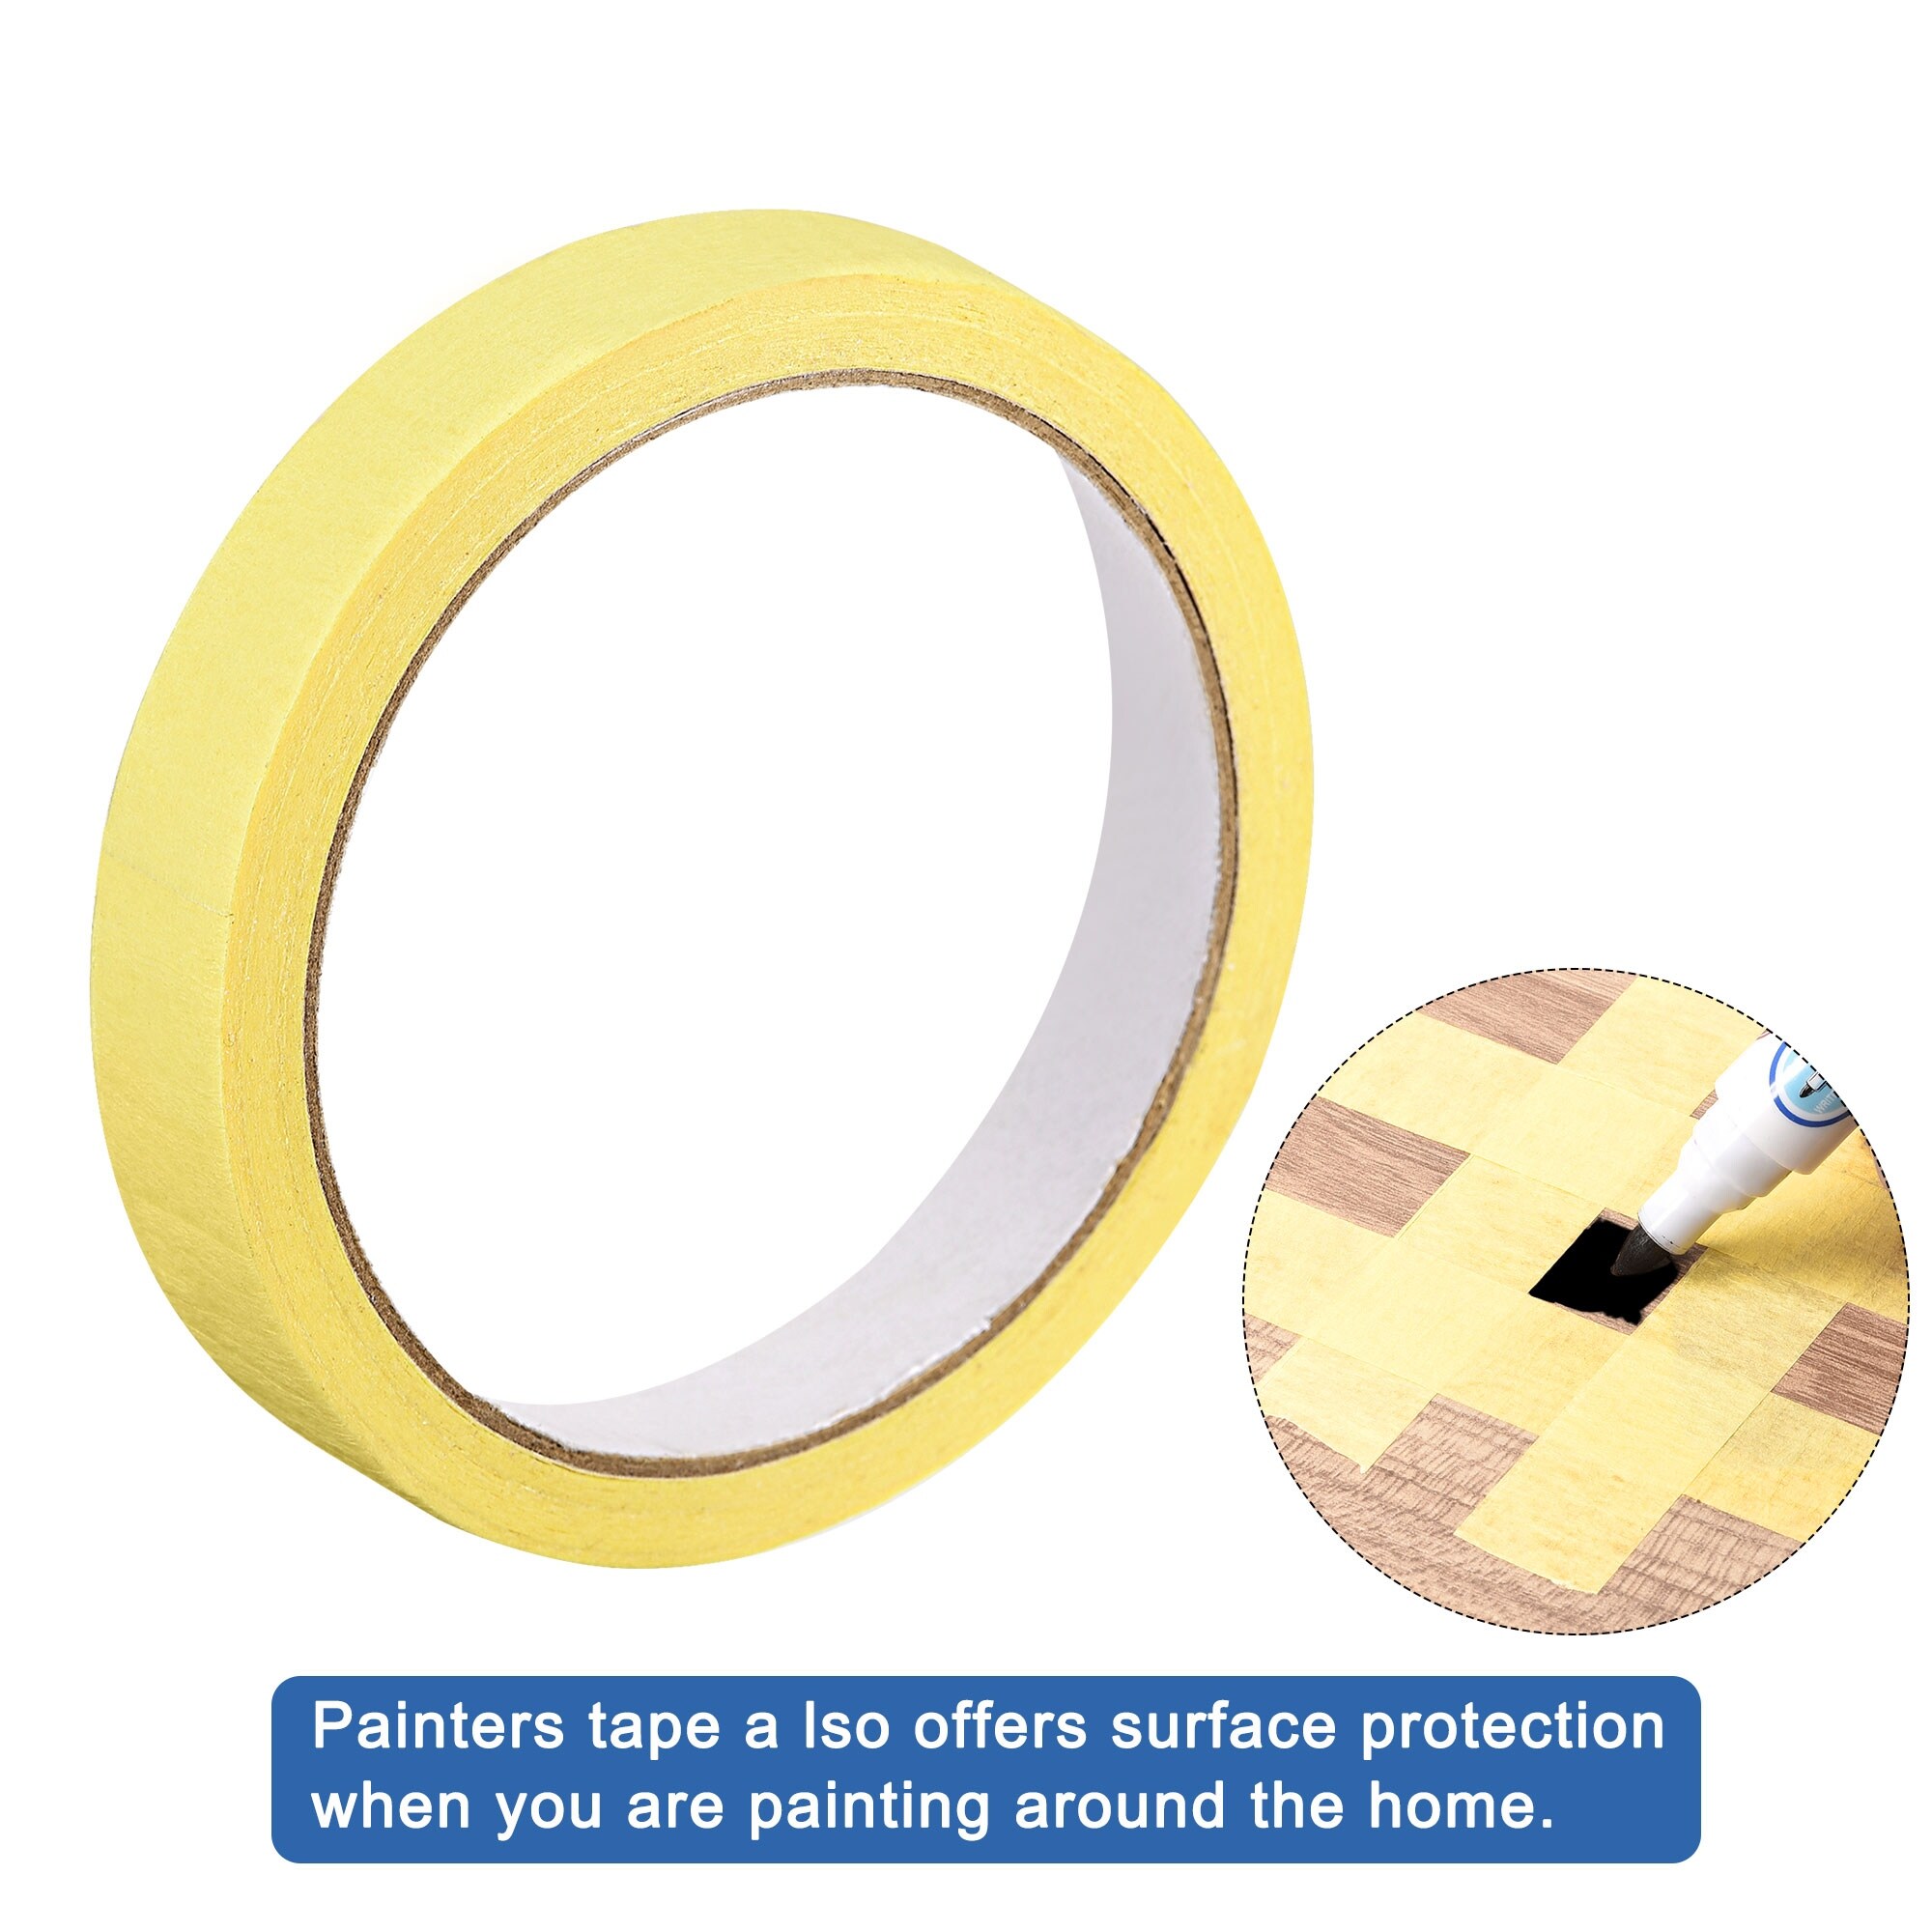 Painters Tape Adhesive Painting Tape 0.59 Inches x 21.87 Yards Beige 6 Pcs - 1.5cm x 20m